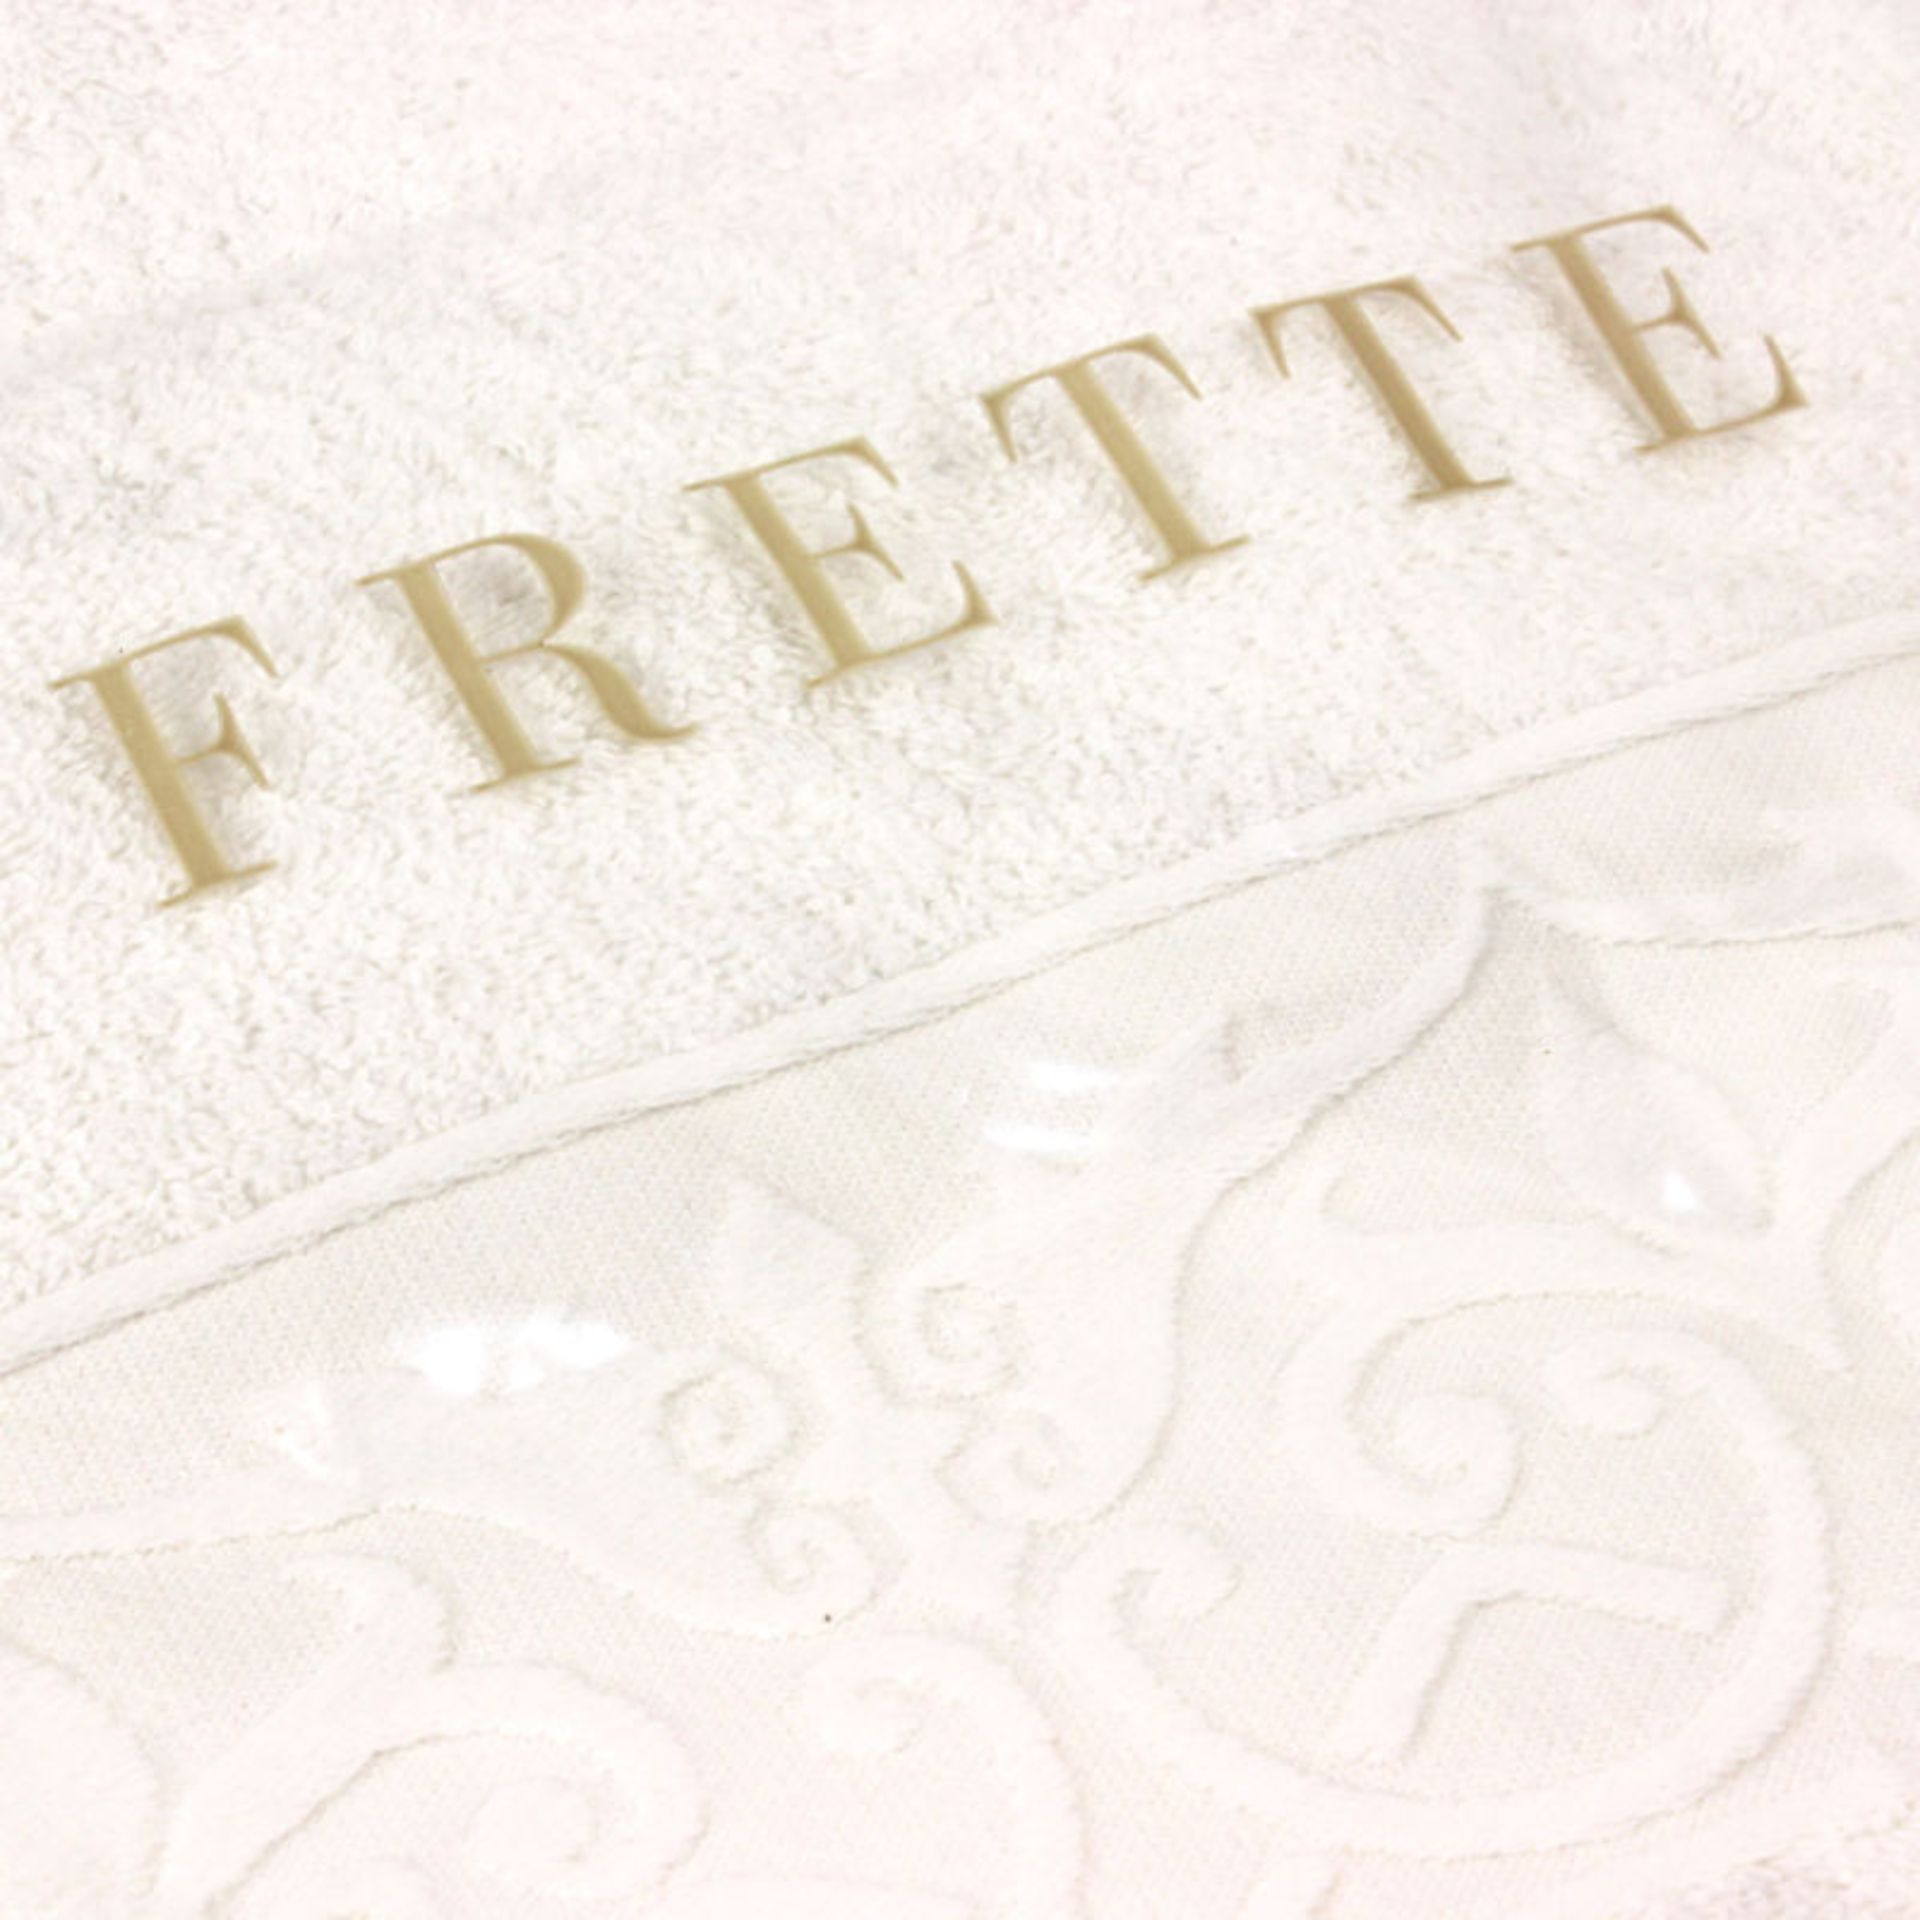 V *TRADE QTY* Brand New Frette Italian White Bath Towel With Embossed Pattern X 4 YOUR BID PRICE - Image 2 of 2